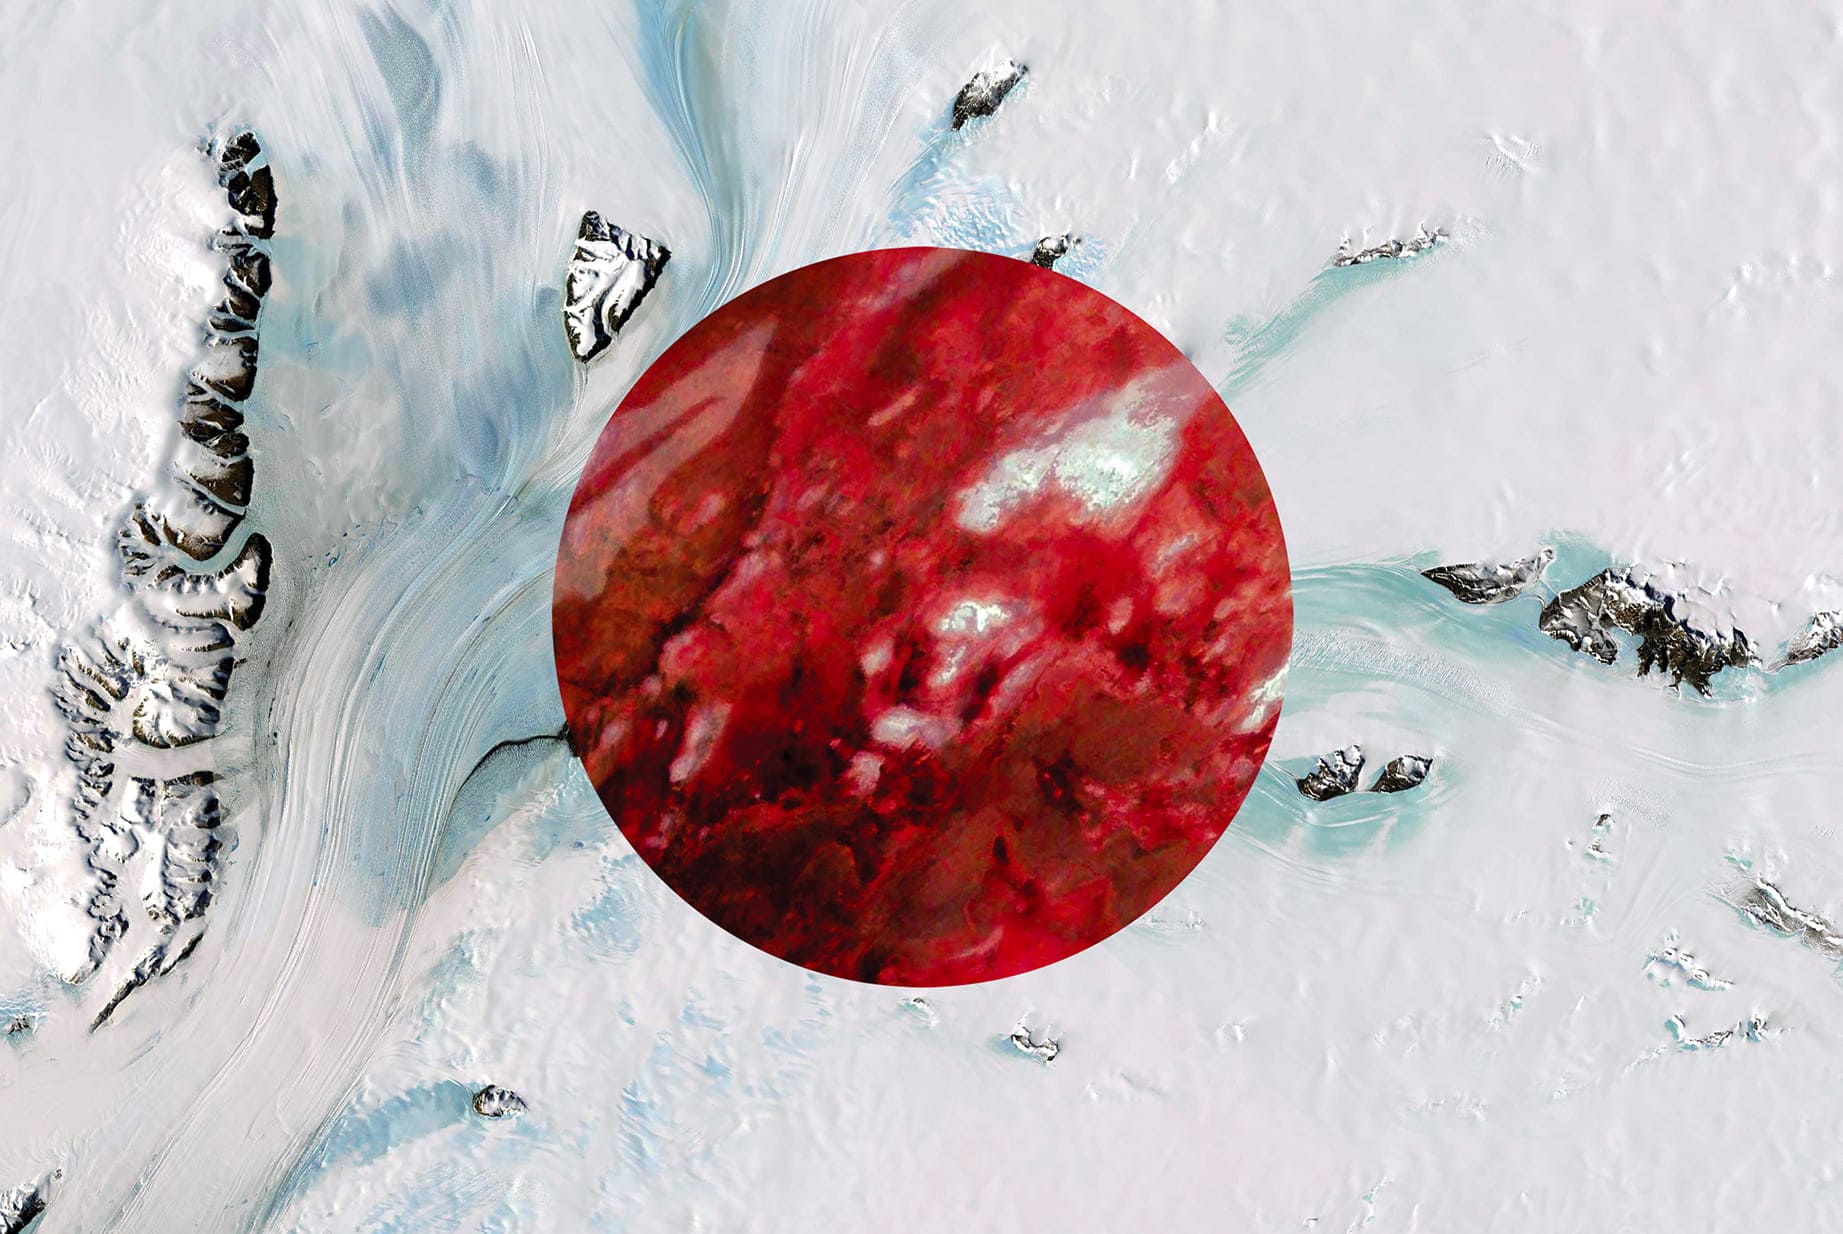 JAPAN EARTH FLAG, 2016, DIGITAL COLLAGE OF SATELLITE PHOTOGRAPHY FROM ANTARCTICA, AUSTRALIA, diasec print CM 67×100, edition of 9